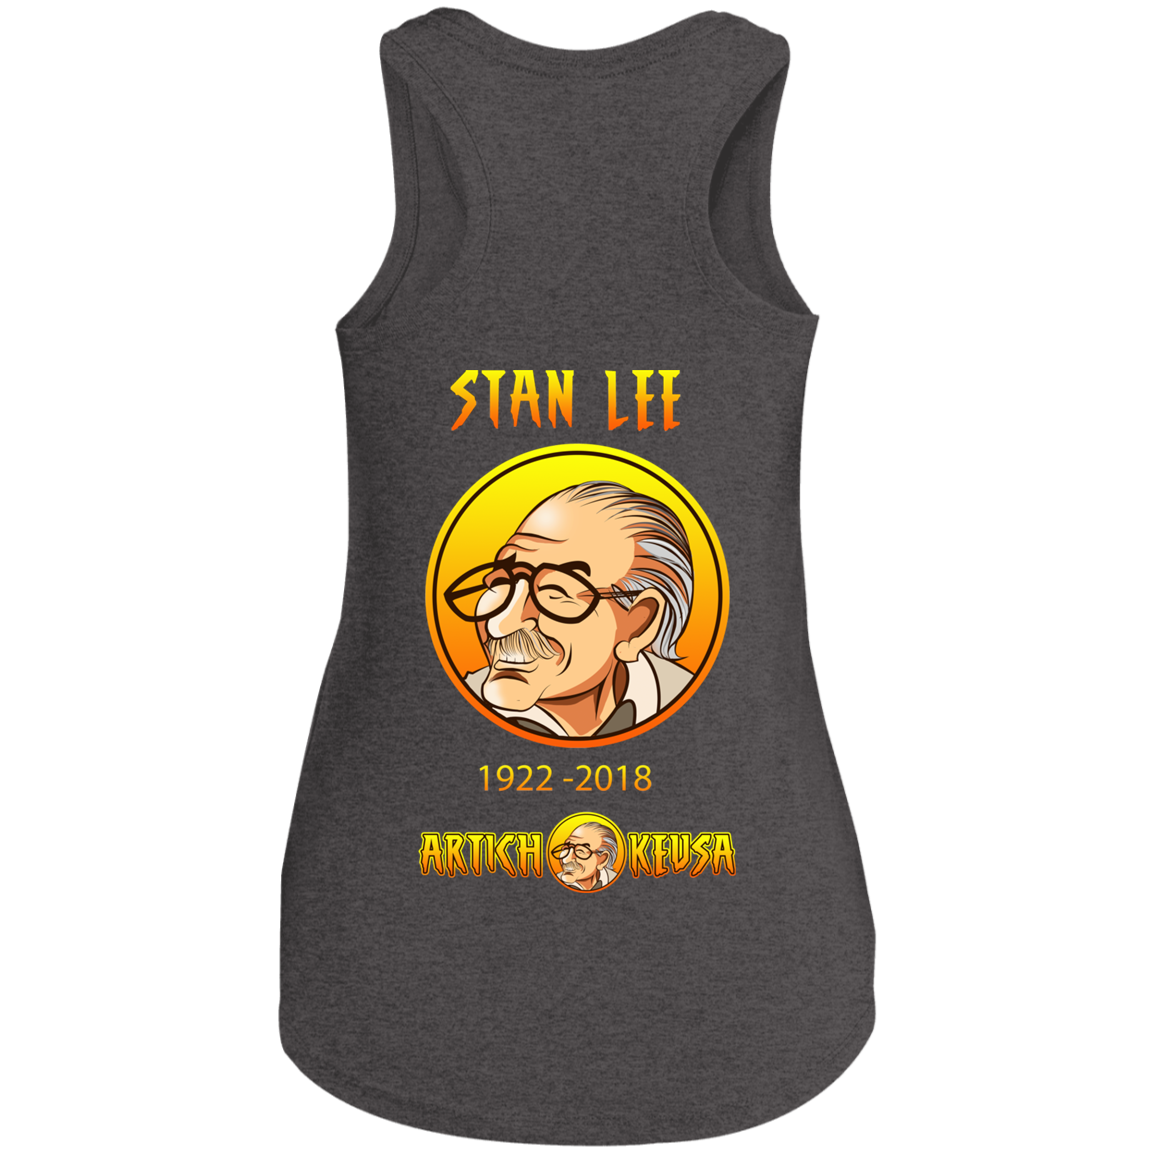 ArtichokeUSA Character and Font design. Stan Lee Thank You Fan Art. Let's Create Your Own Design Today. Ladies' Perfect Tri Racerback Tank